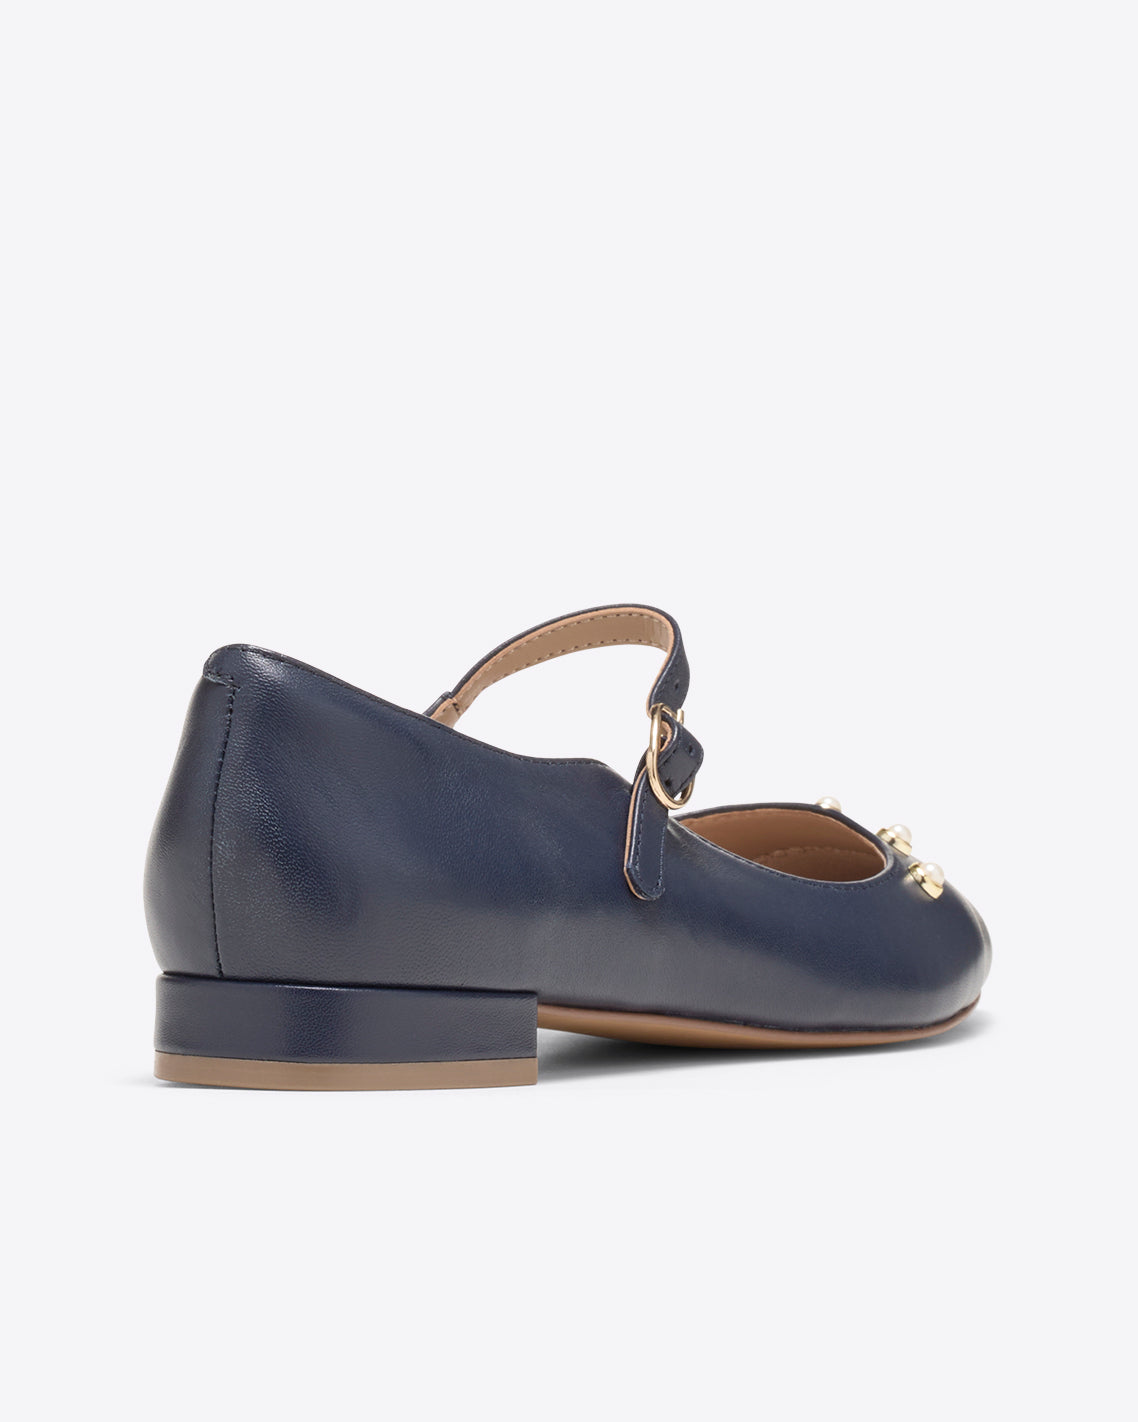 Adeline Mary Jane Flats in Navy Leather